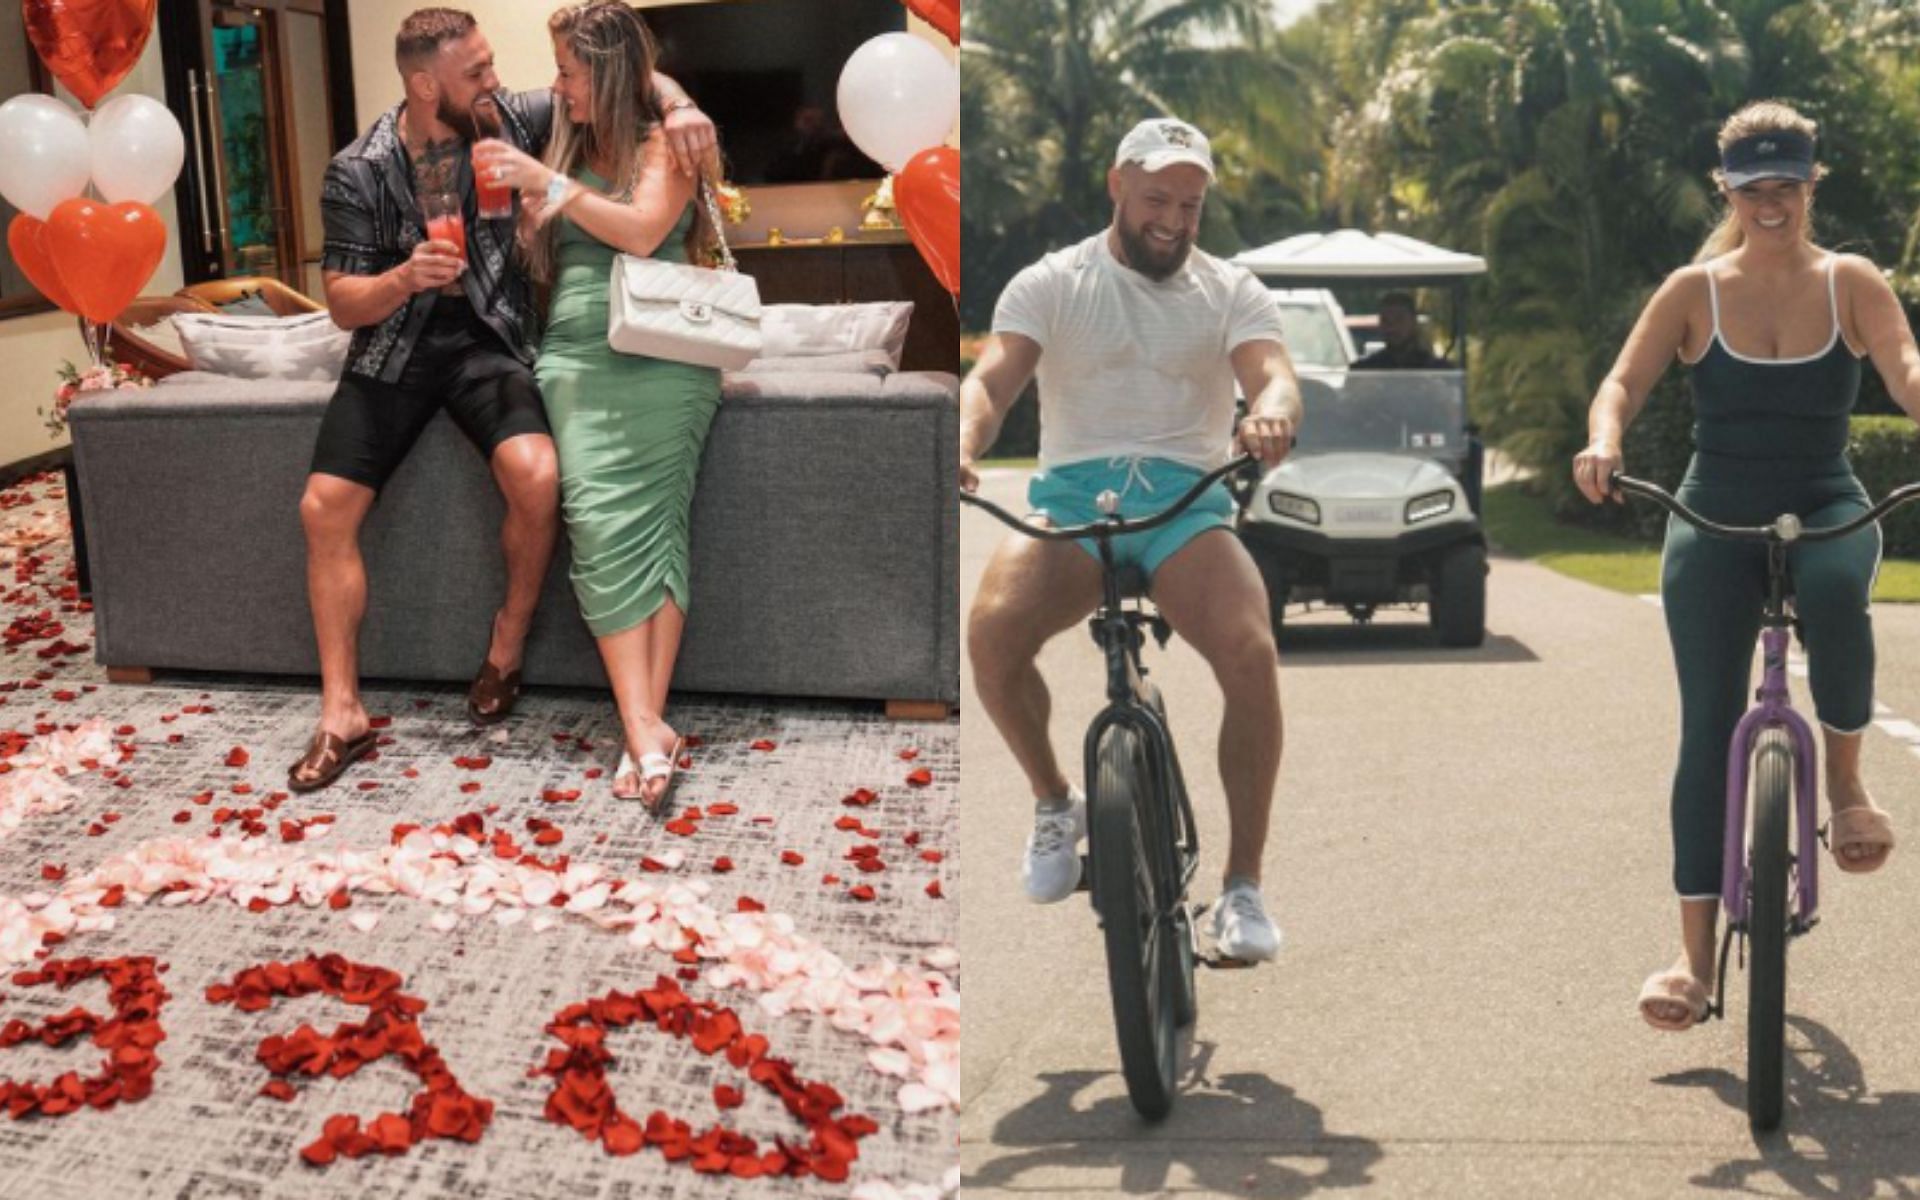 Conor McGregor with his longtime girlfriend Dee Devlin [Images courtesy - @thenotoriousmma on Instagram]